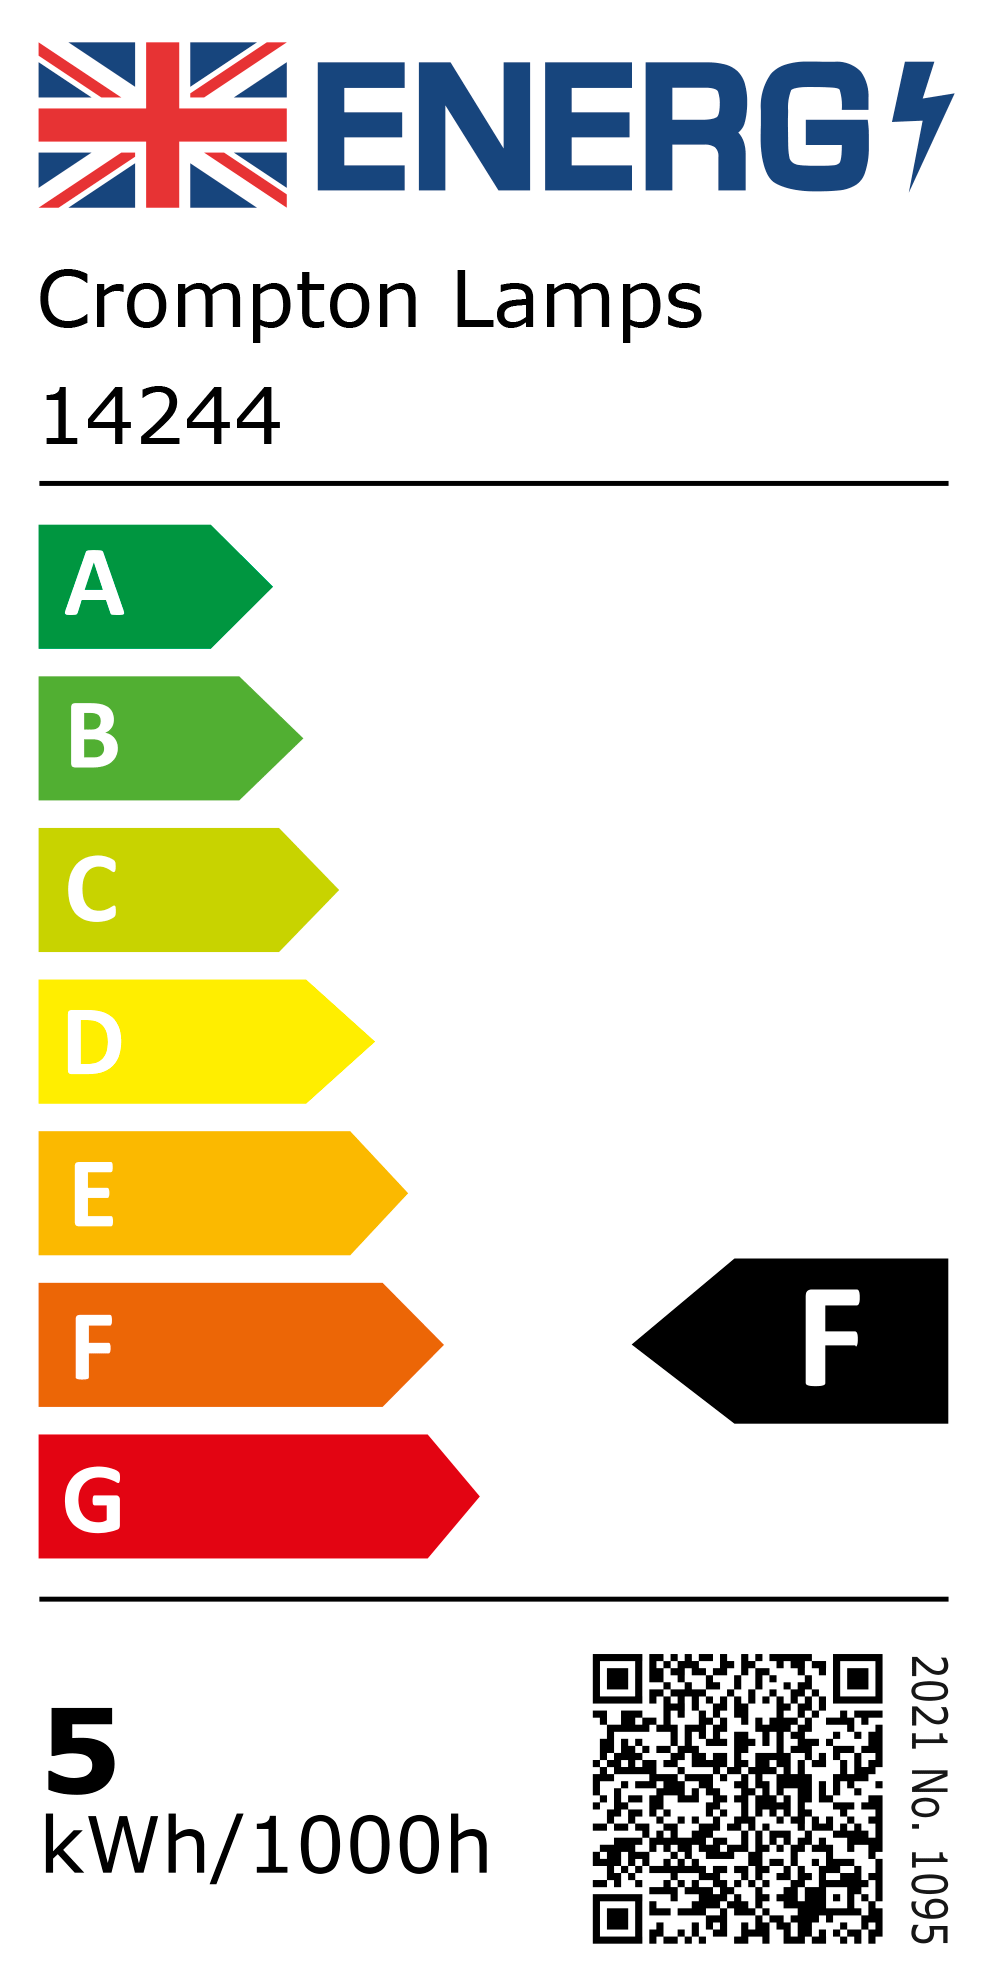 New 2021 Energy Rating Label: Stock Code 14244